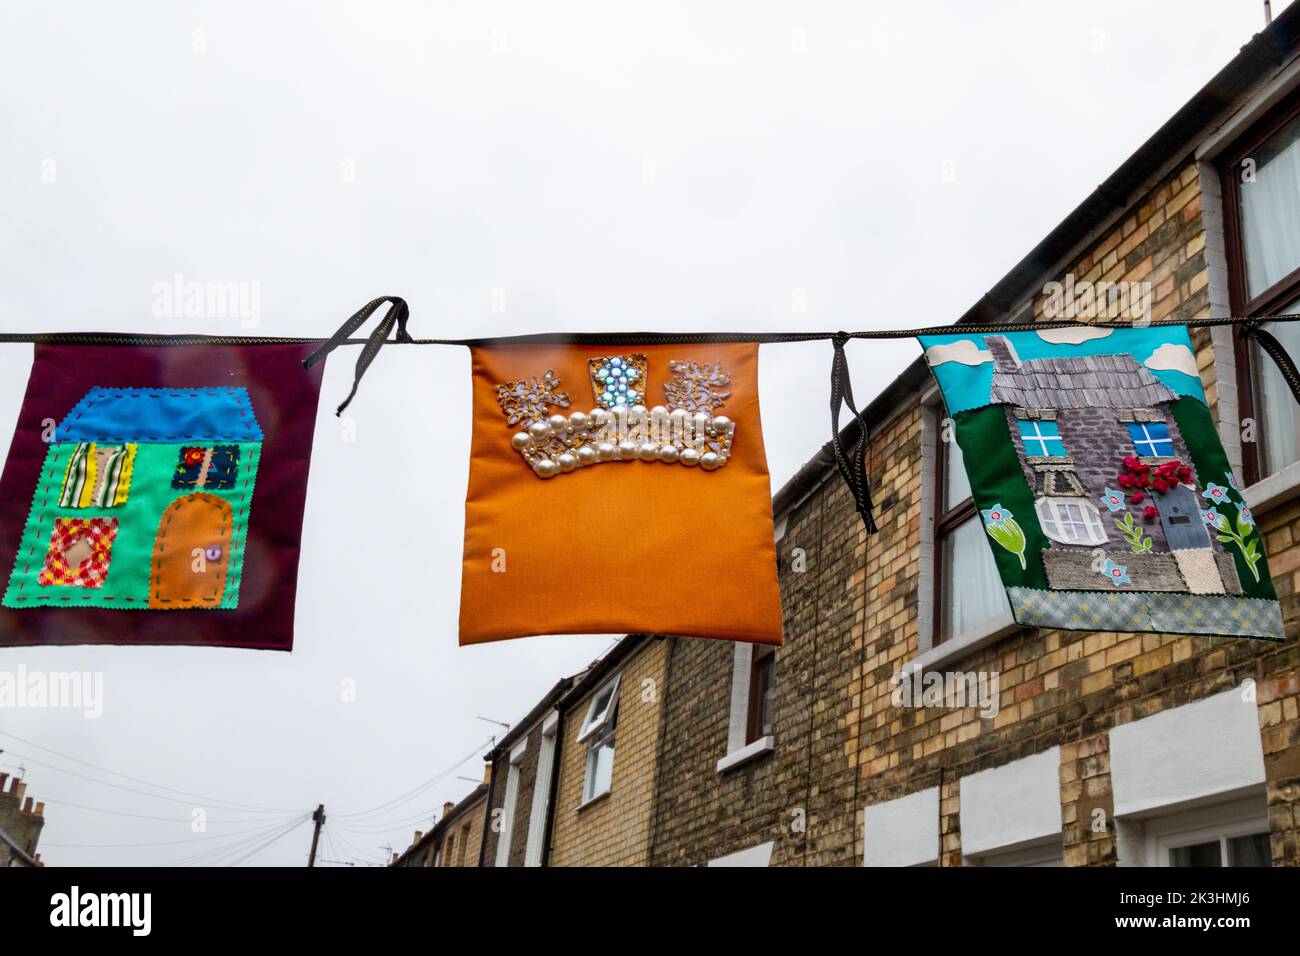 To decorate the street party the residents of Gwydir St created bunting displaying crowns and their own homes. Stock Photo